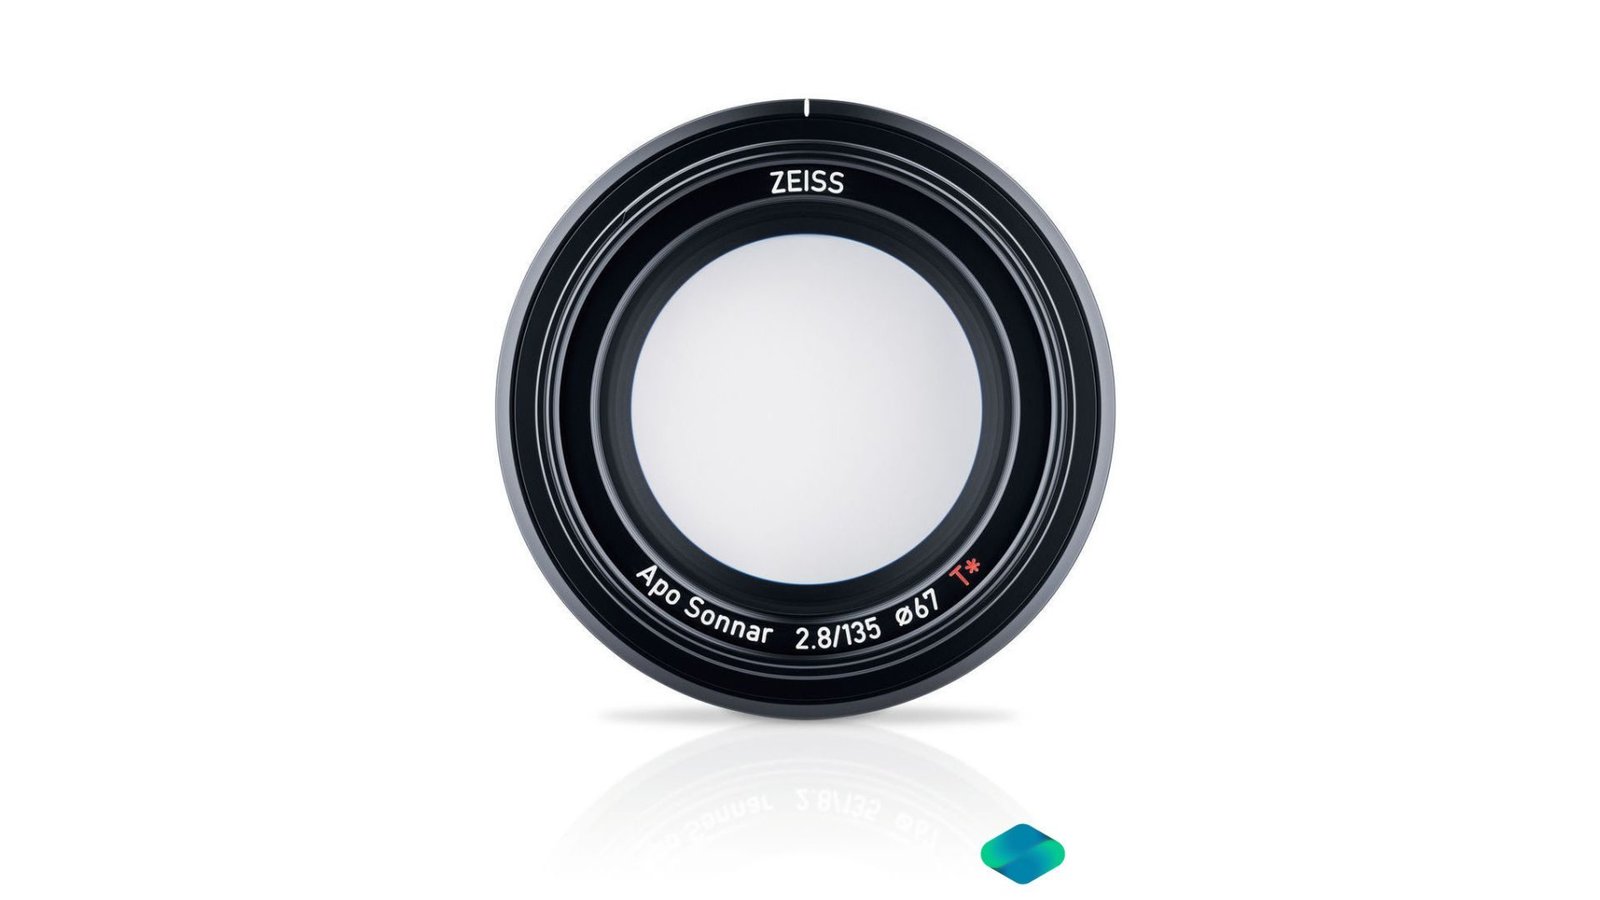 Rent ZEISS Batis Lens for Sony E Mount 2.8135 in Delhi NCR, Camera, Camera lenses for rent, Camera accessories, in Delhi Gurgaon Noida, hire Shooting equipment, Lighting equipment rental, Film gear rental for Video production, camera rental company in Delhi, film equipment rental company